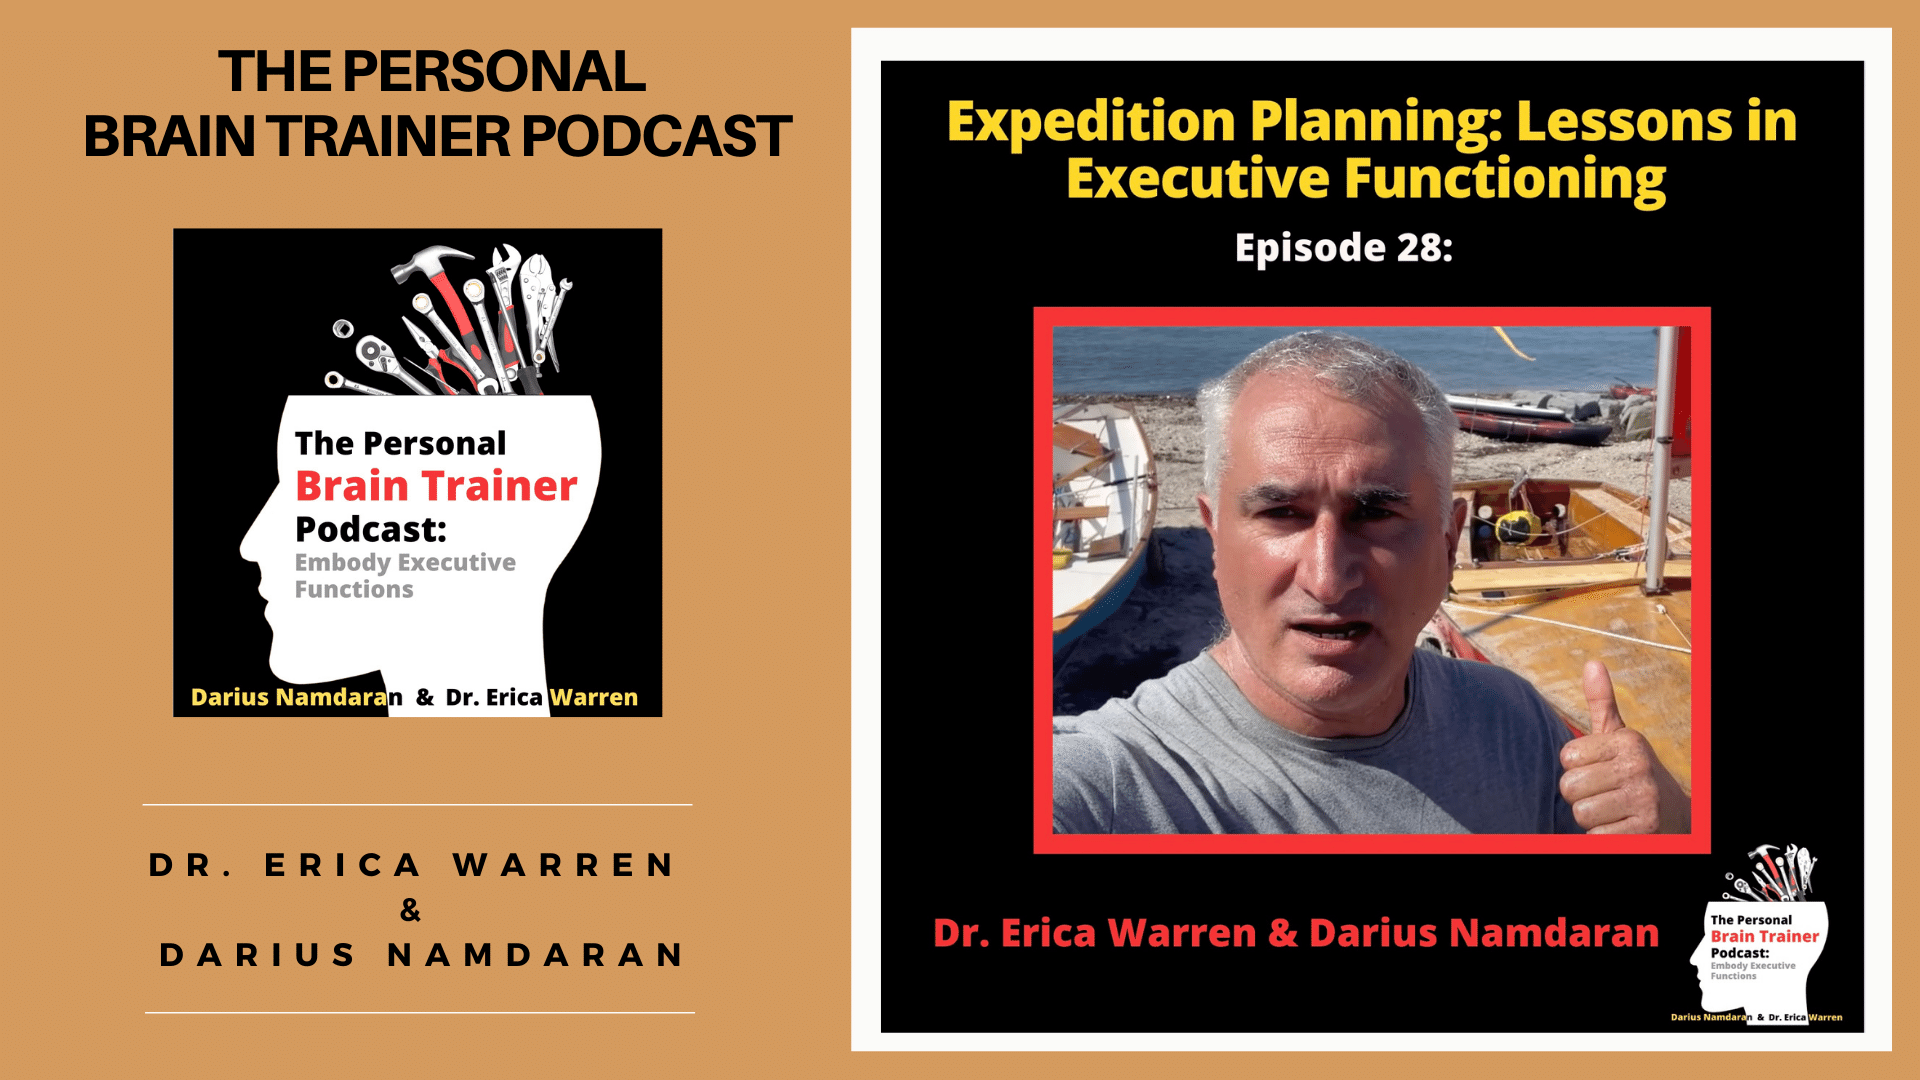 Planning and expedition - lessons in executive functioning